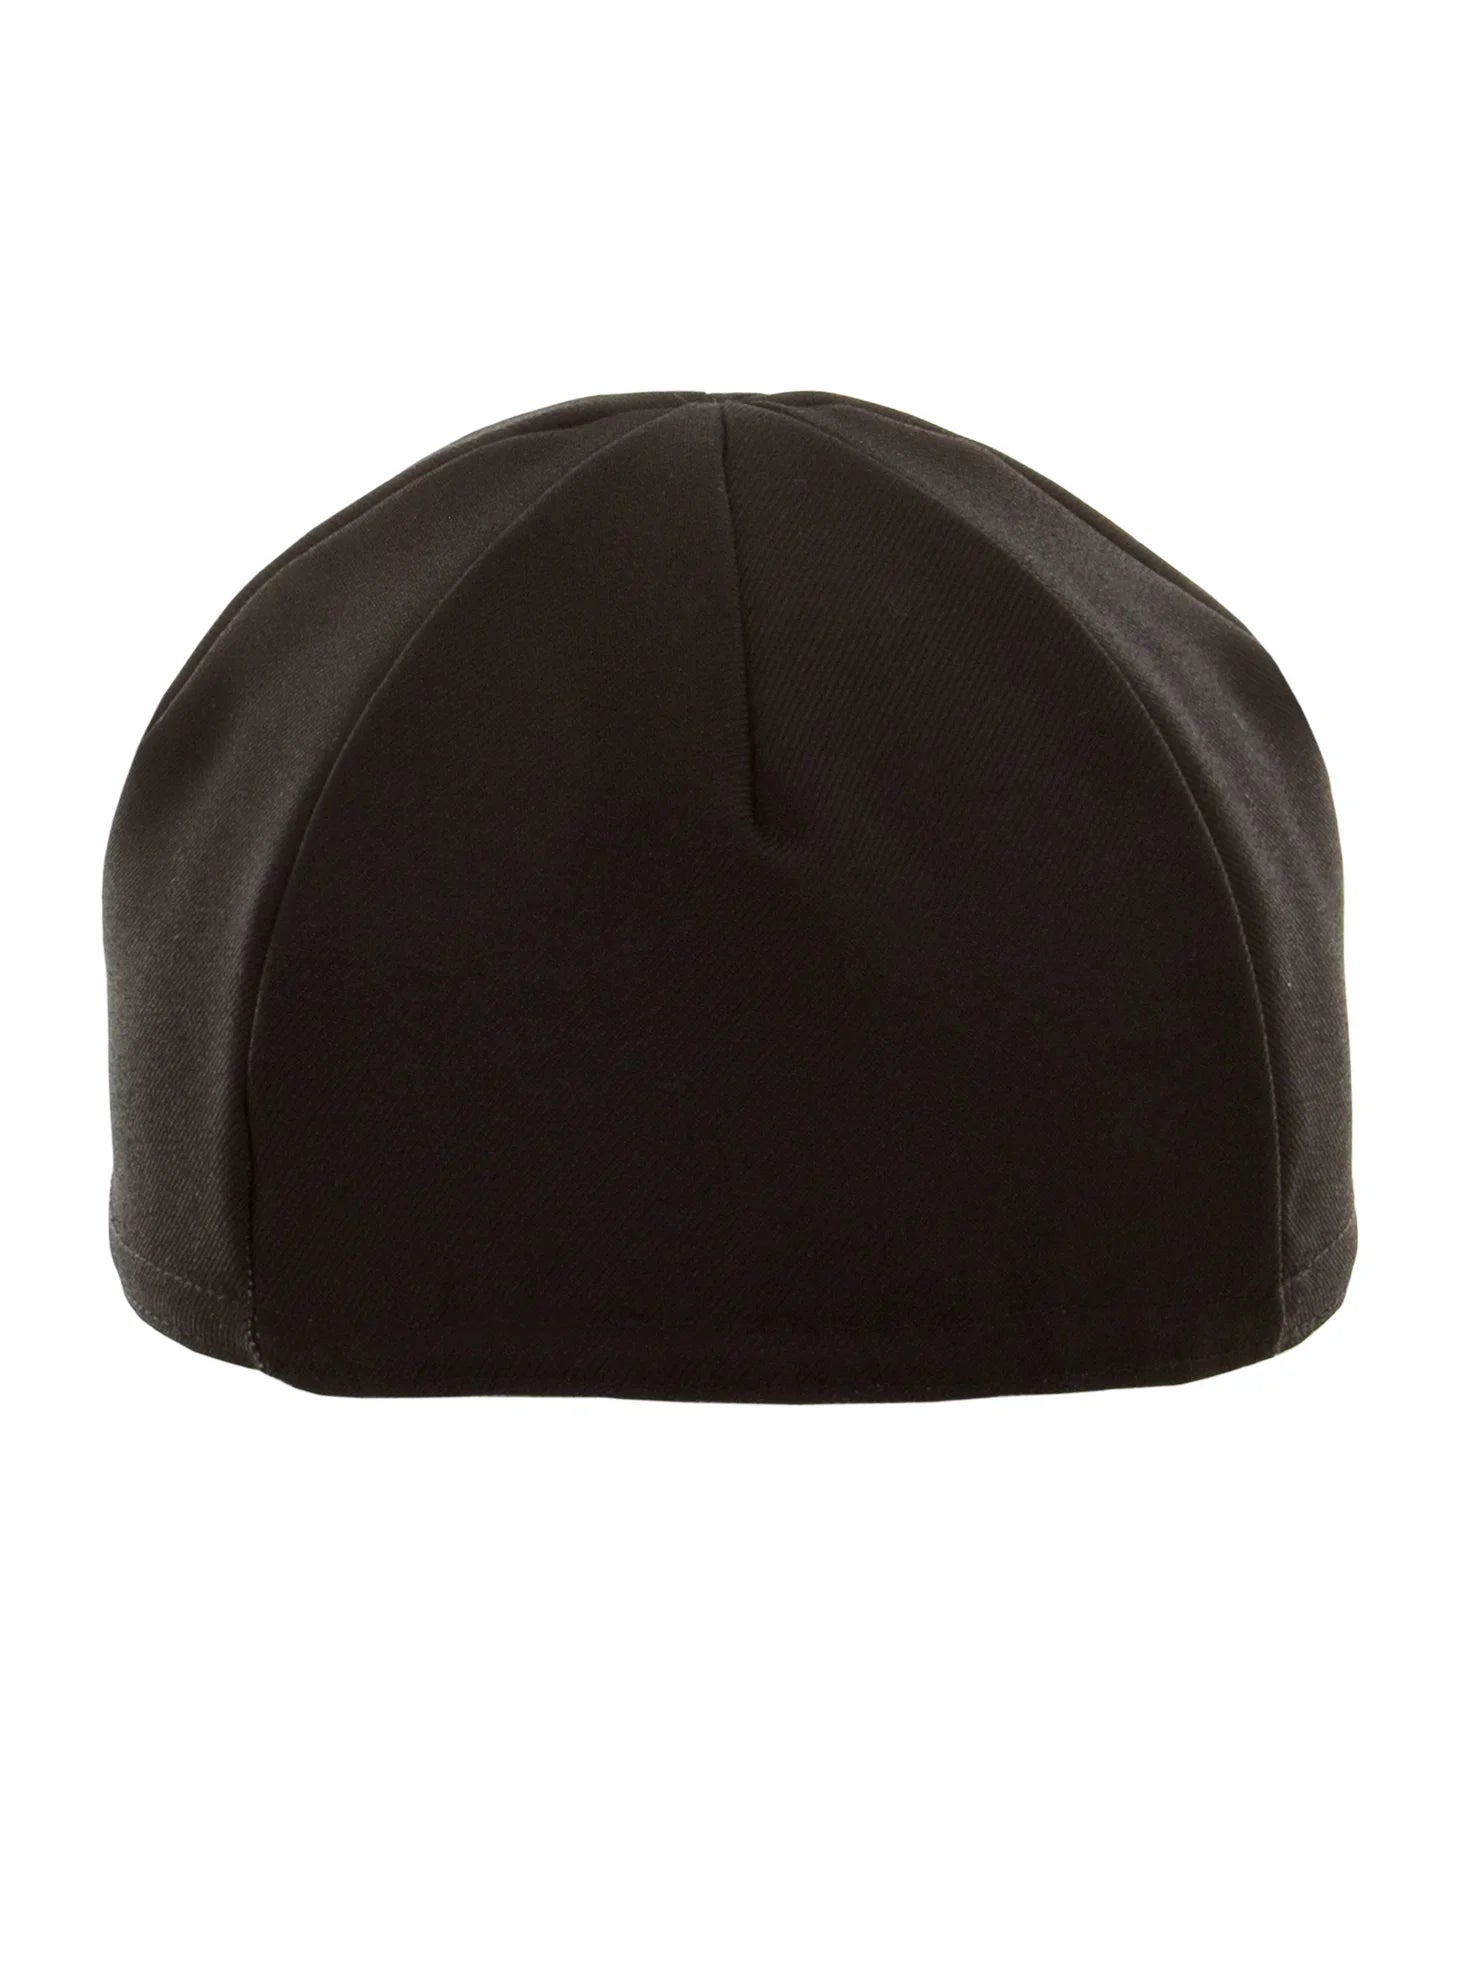 Traditional Cycling Cap - VERGE SPORT GLOBAL